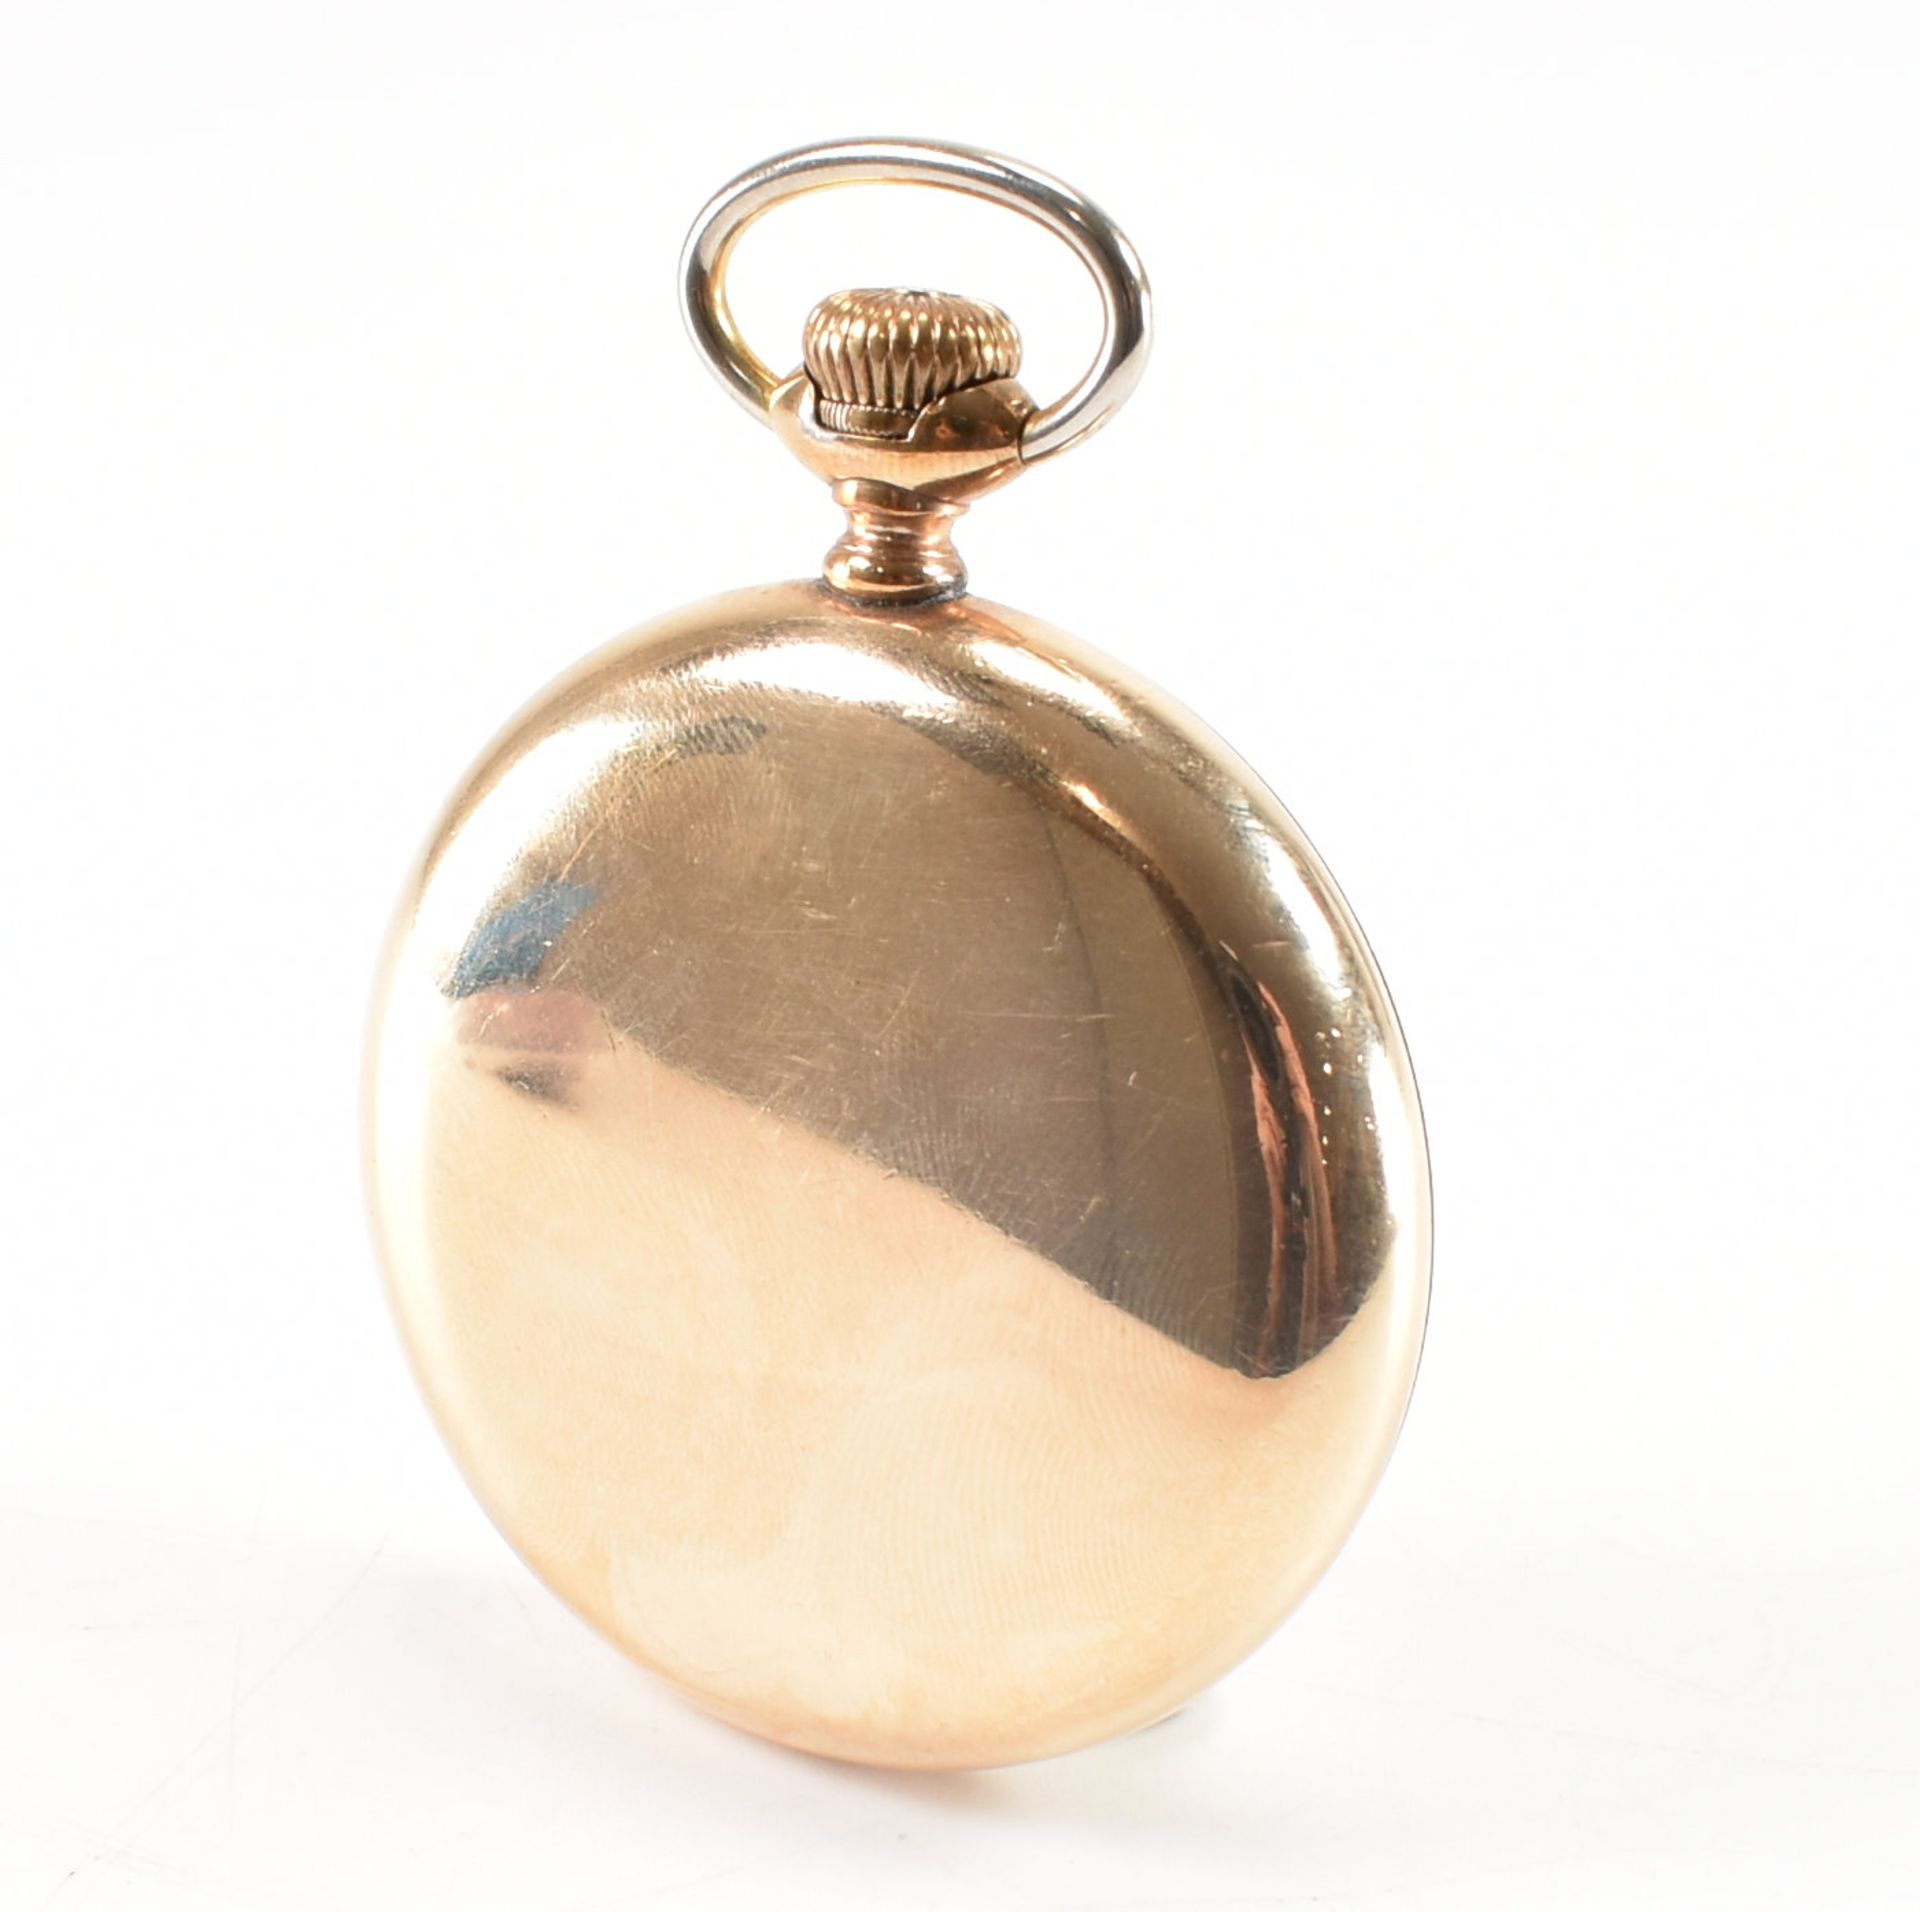 ANTIQUE HAMILTON WATCH COMPANY GOLD PLATED POCKET WATCH - Image 4 of 9